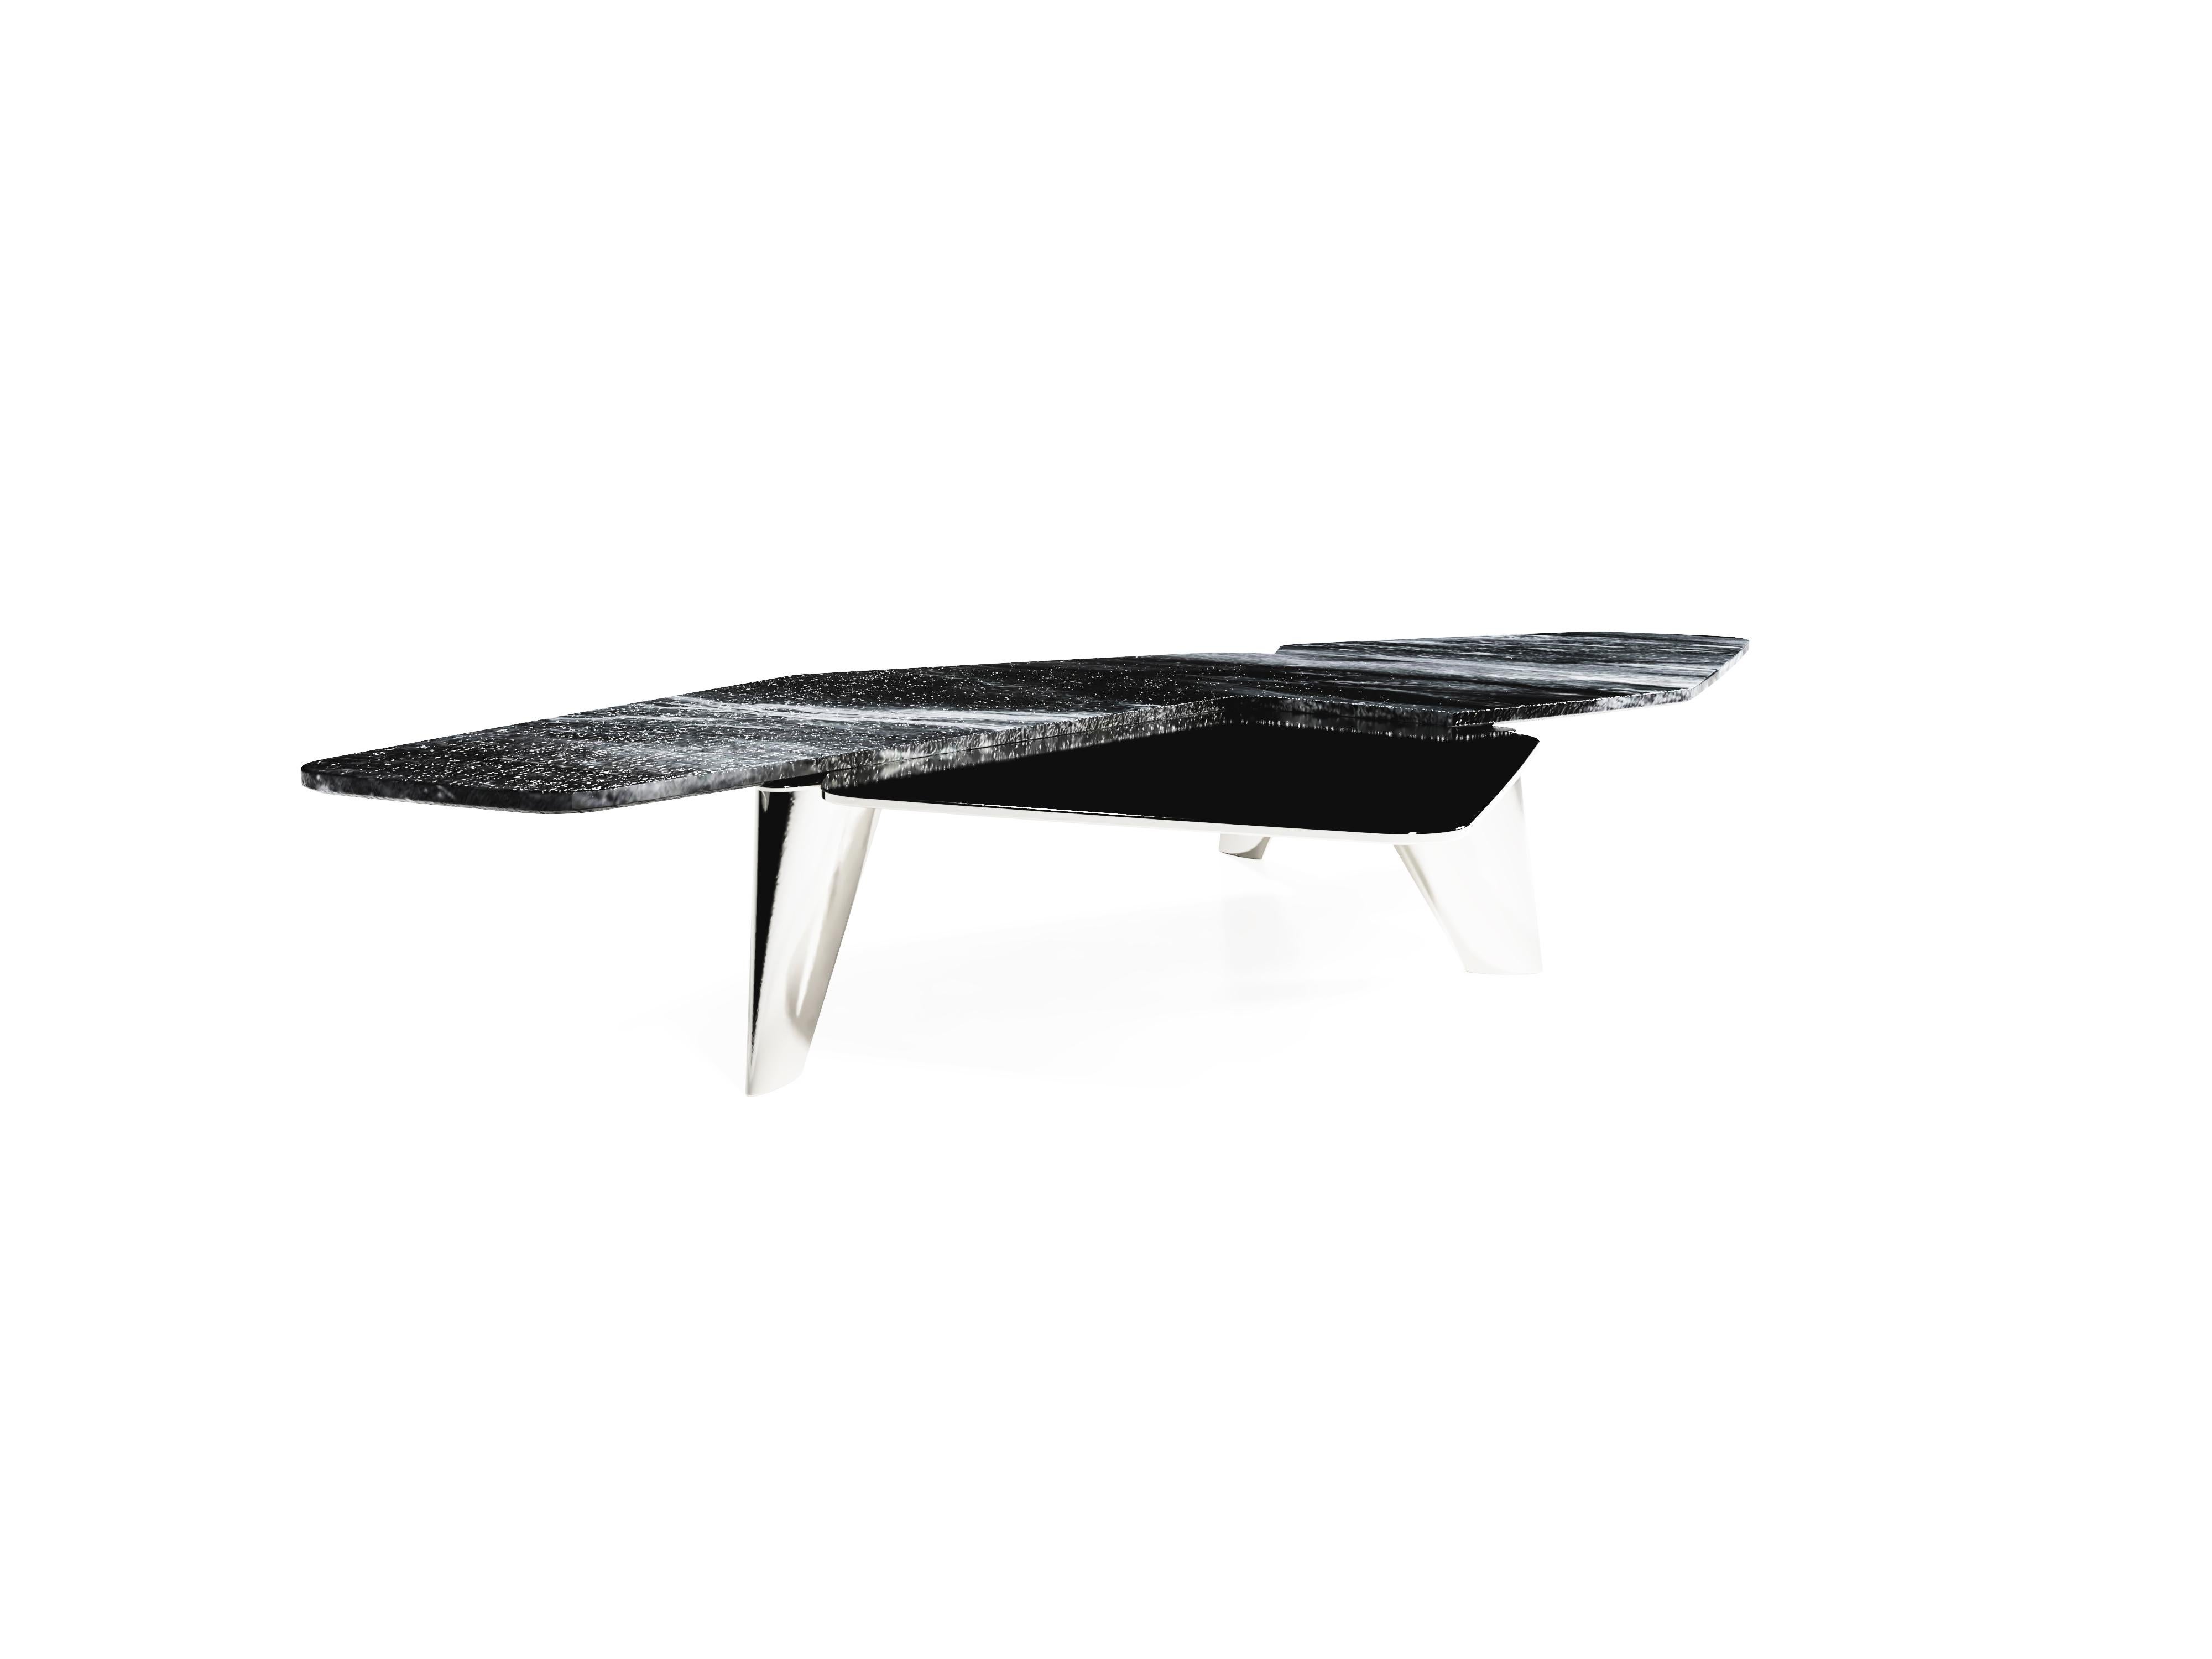 “The Elements II ”Contemporary Center Coffee Table ft marble and solid stainless steel plate in brushed finish.

Created of the two totally different shapes, structures reveals some symbiotic influence between each other. One delicate - second more